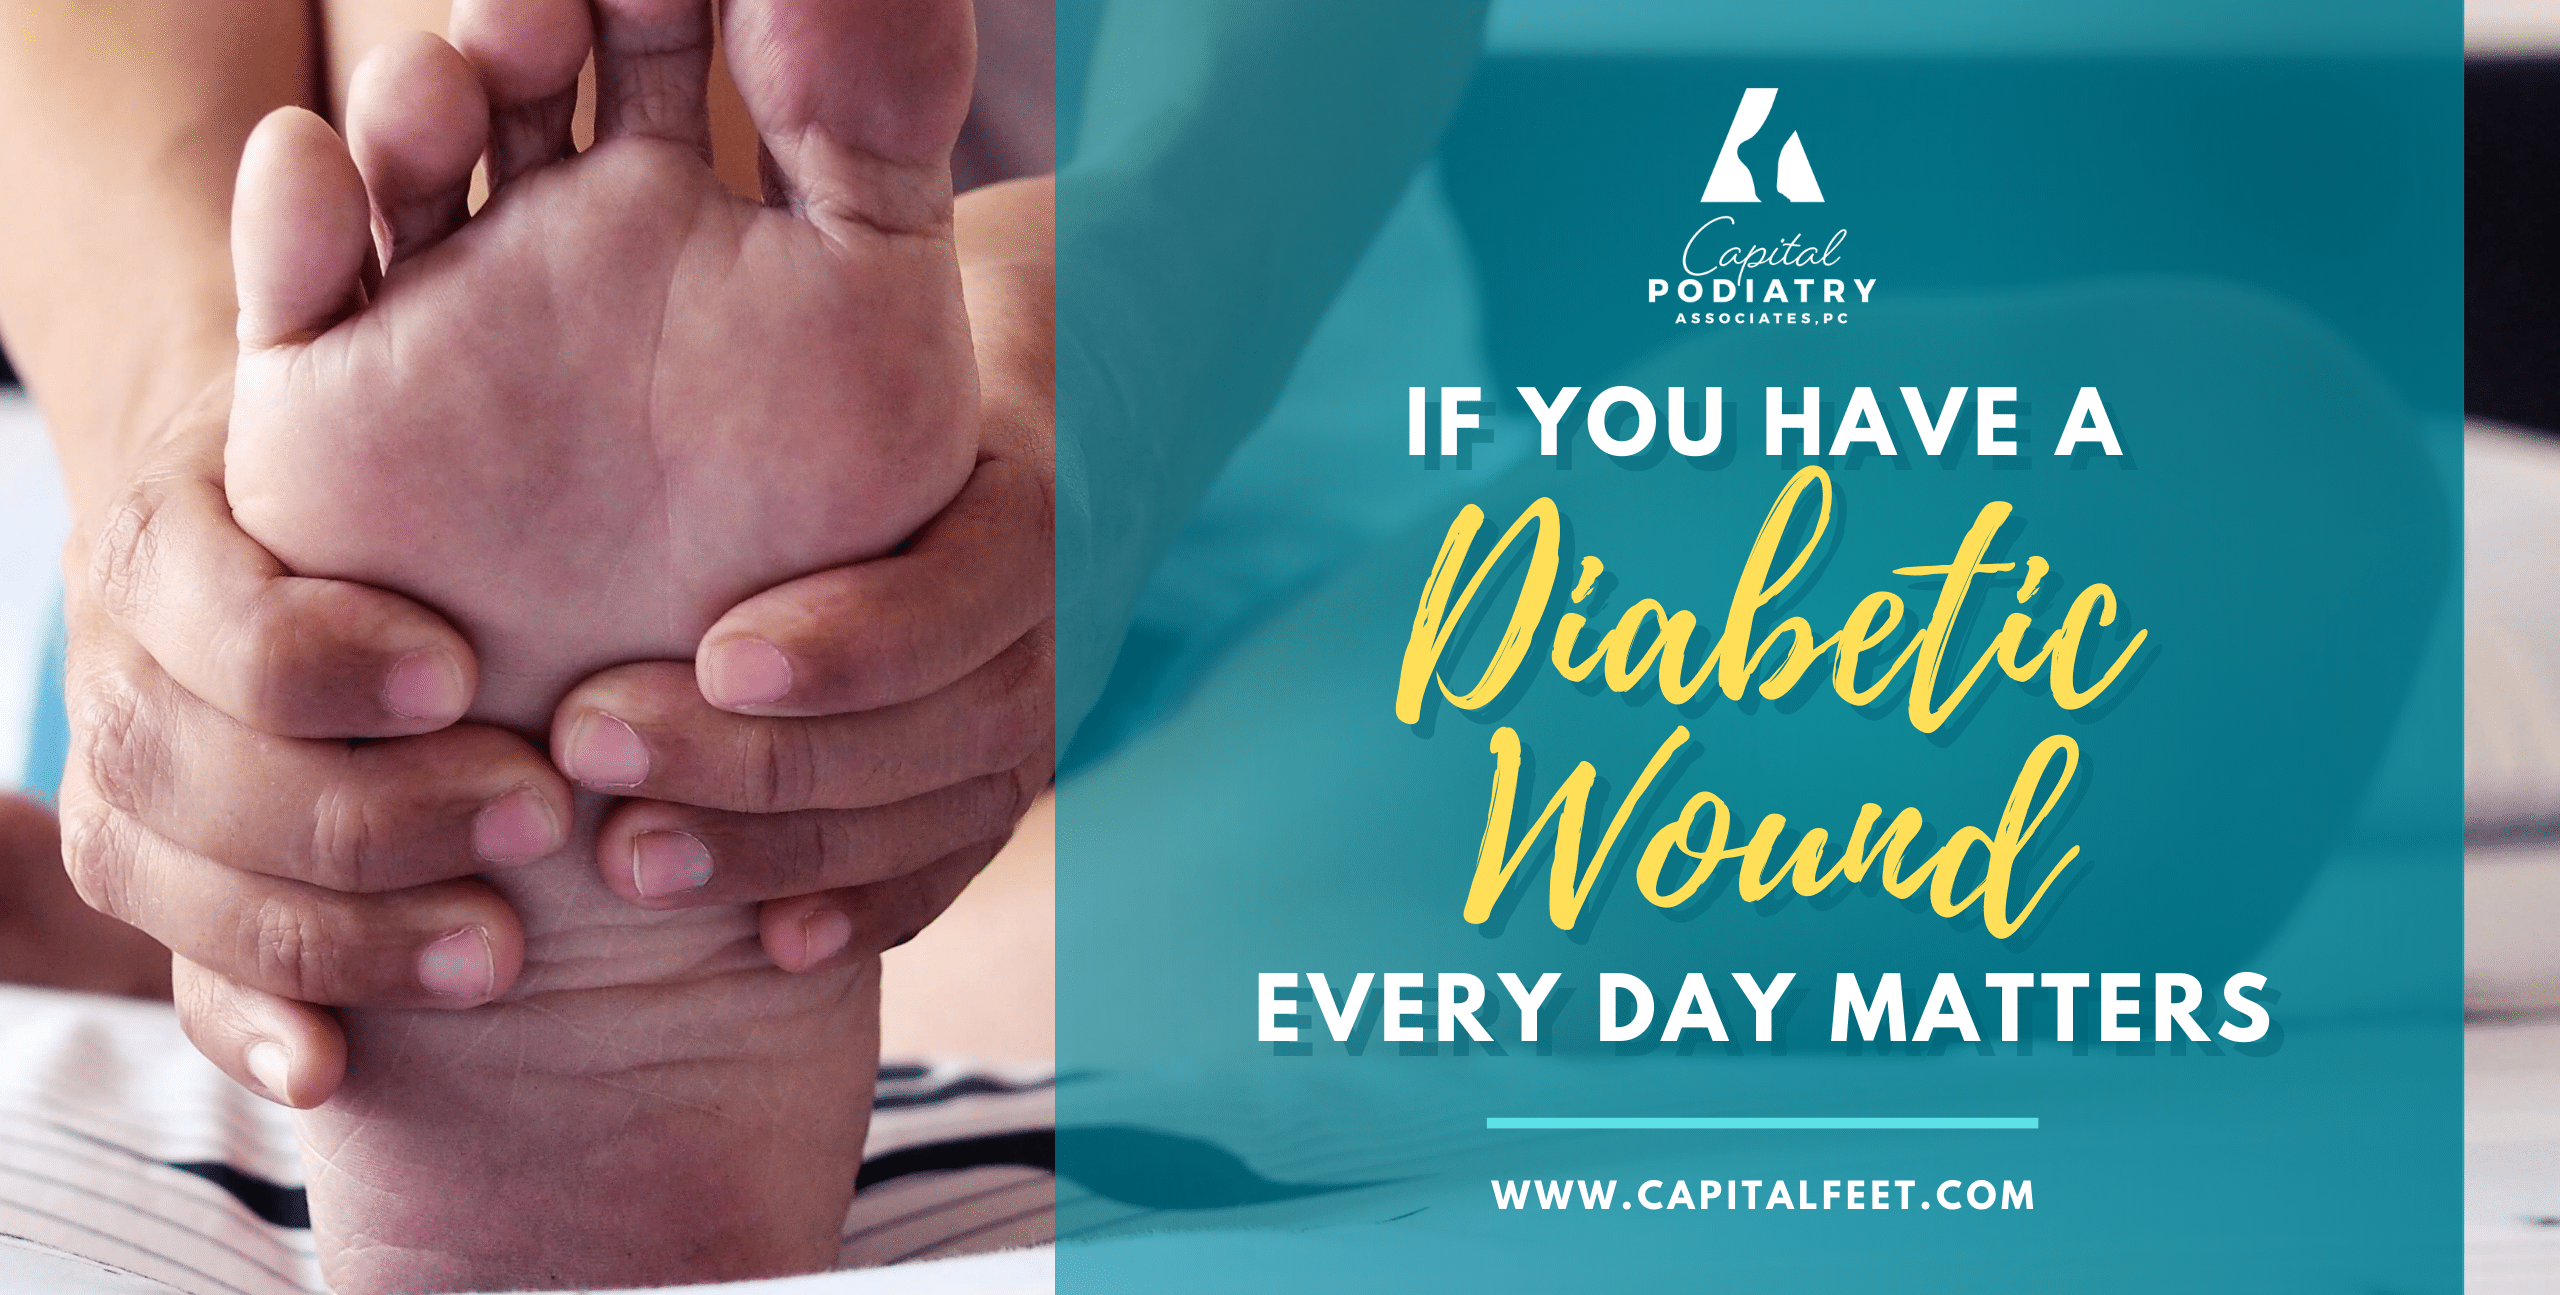 If You Have a Diabetic Wound, Every Day Matters